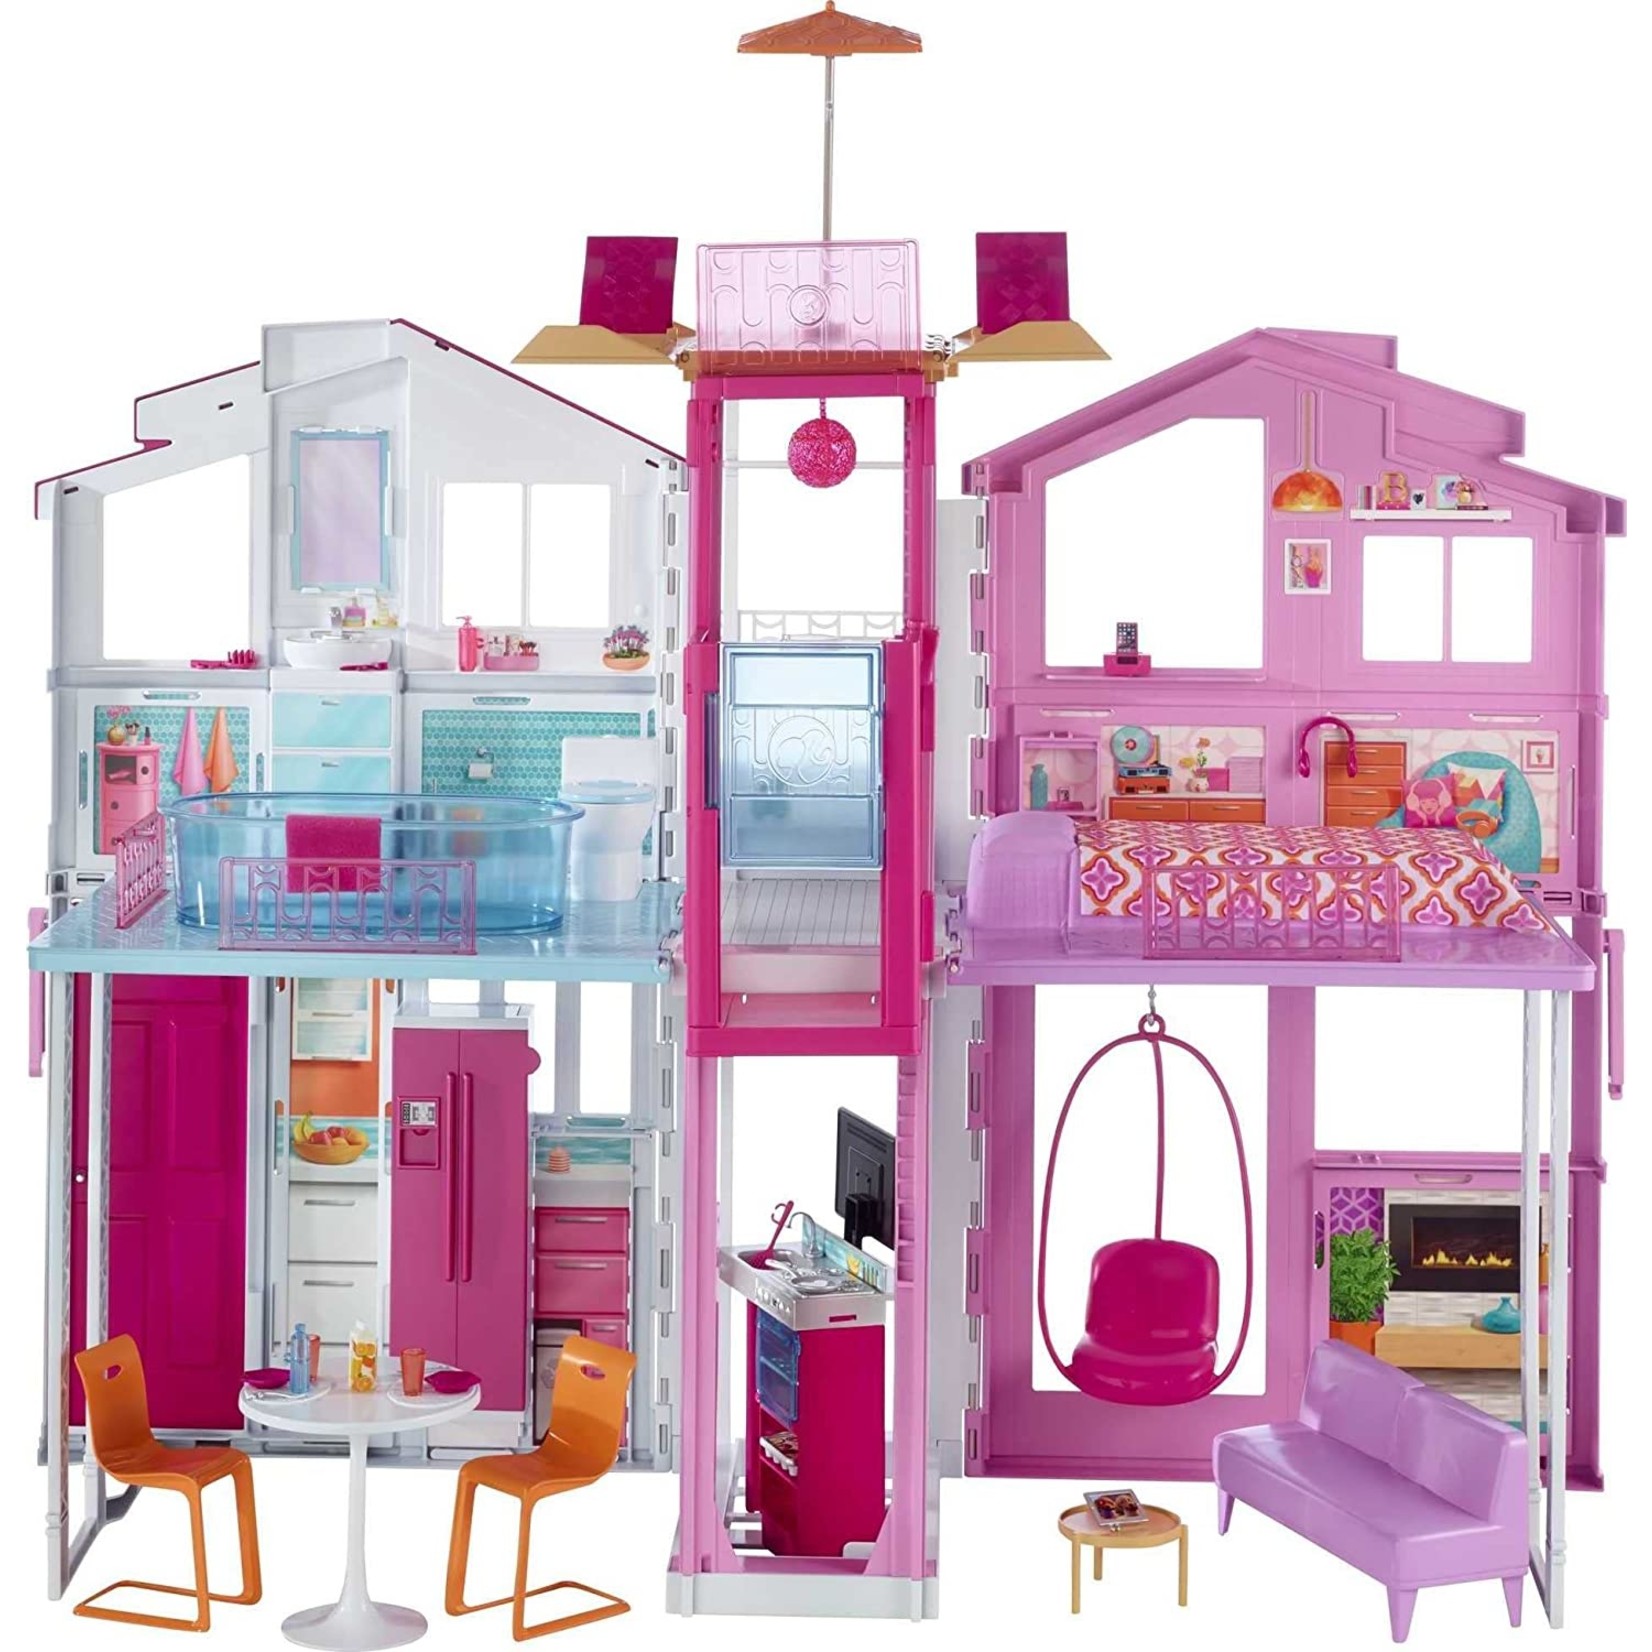 Nova Barbie 3-Story Townhouse Dollhouse with Elevator, Swing Chair, Furniture and Accessories, Fold for Portability and Travel